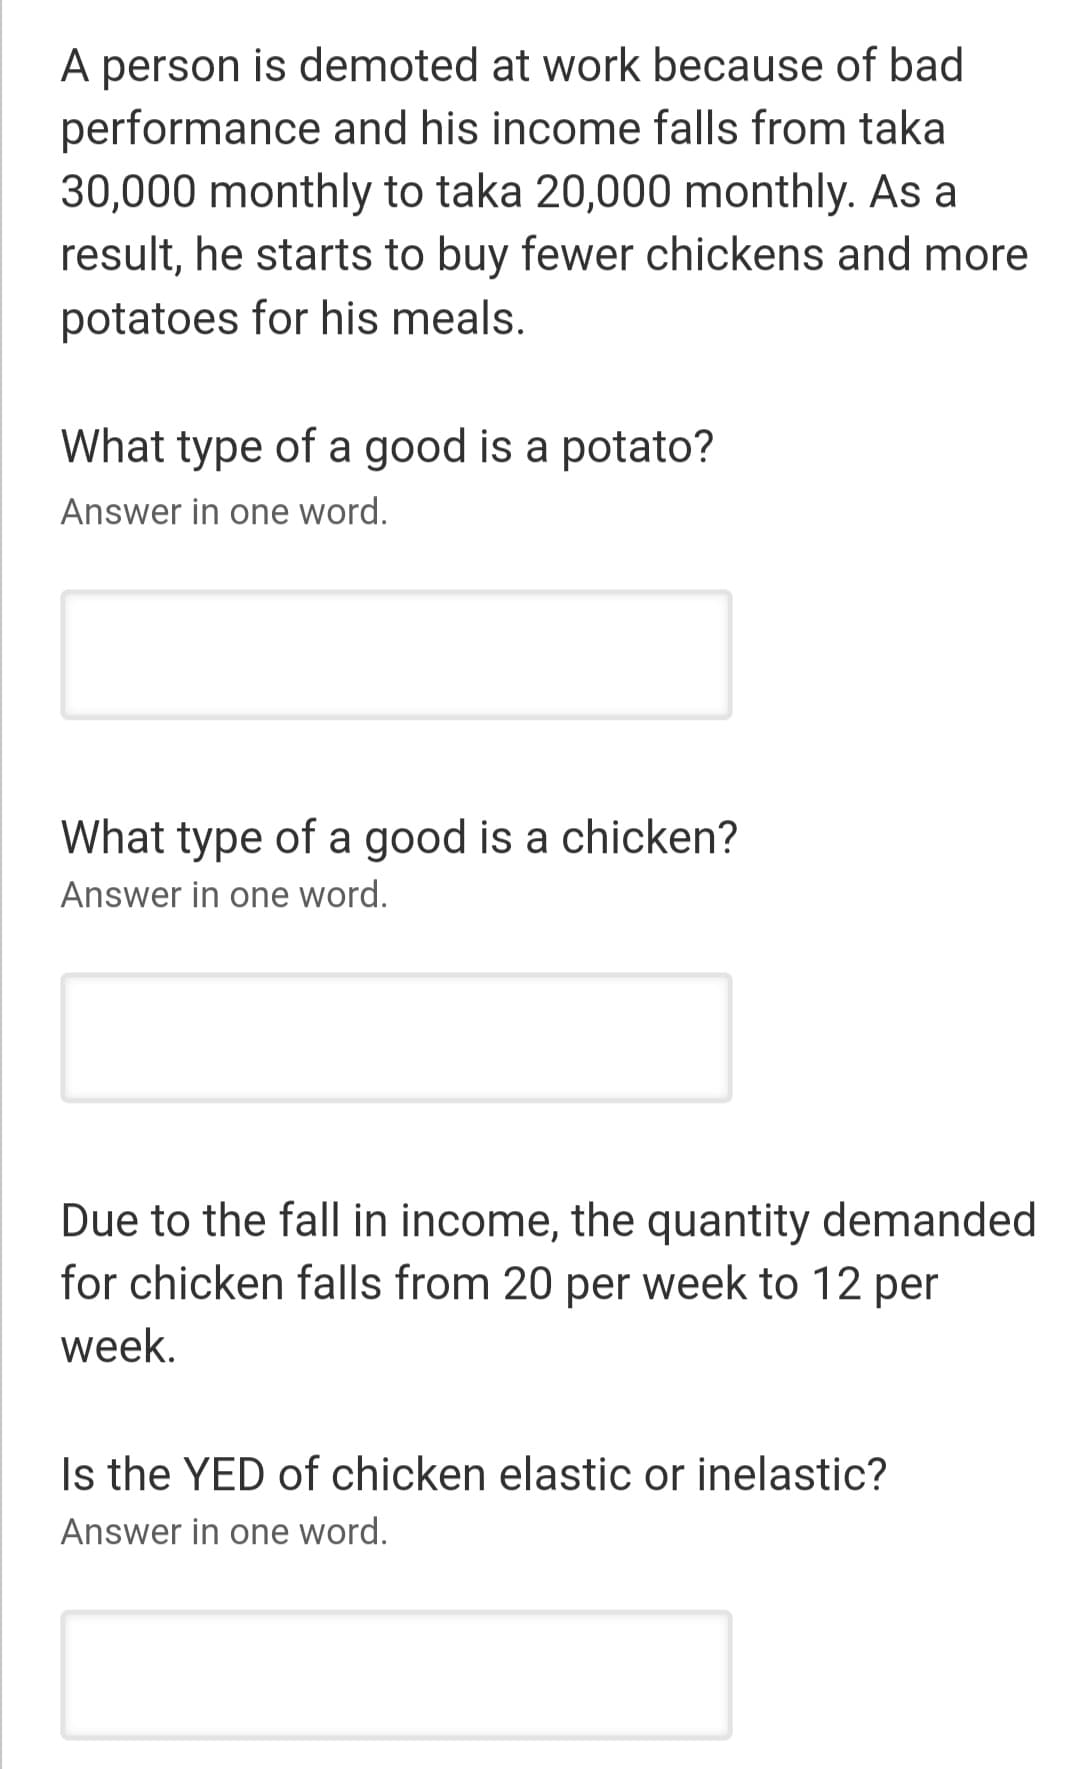 A person is demoted at work because of bad
performance and his income falls from taka
30,000 monthly to taka 20,000 monthly. As a
result, he starts to buy fewer chickens and more
potatoes for his meals.
What type of a good is a potato?
Answer in one word.
What type of a good is a chicken?
Answer in one word.
Due to the fall in income, the quantity demanded
for chicken falls from 20 per week to 12 per
week.
Is the YED of chicken elastic or inelastic?
Answer in one word.
